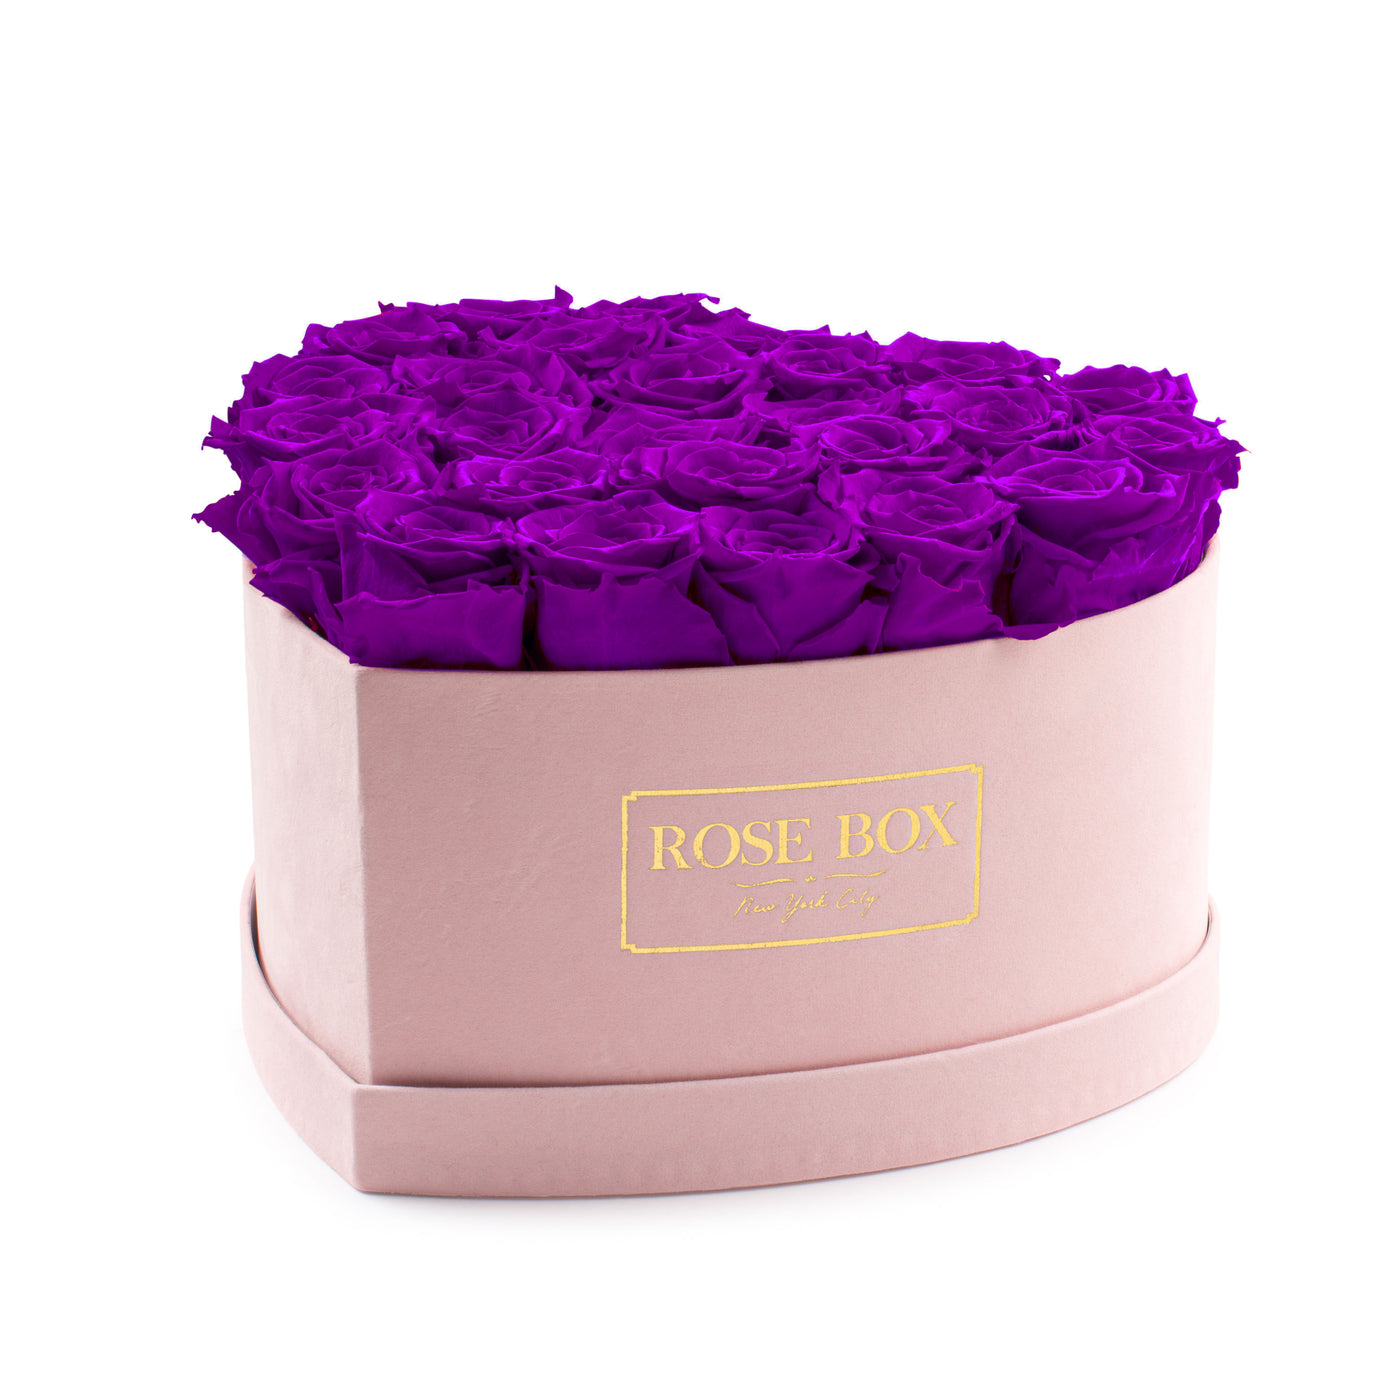 Large Pink Heart Box with Royal Purple Roses